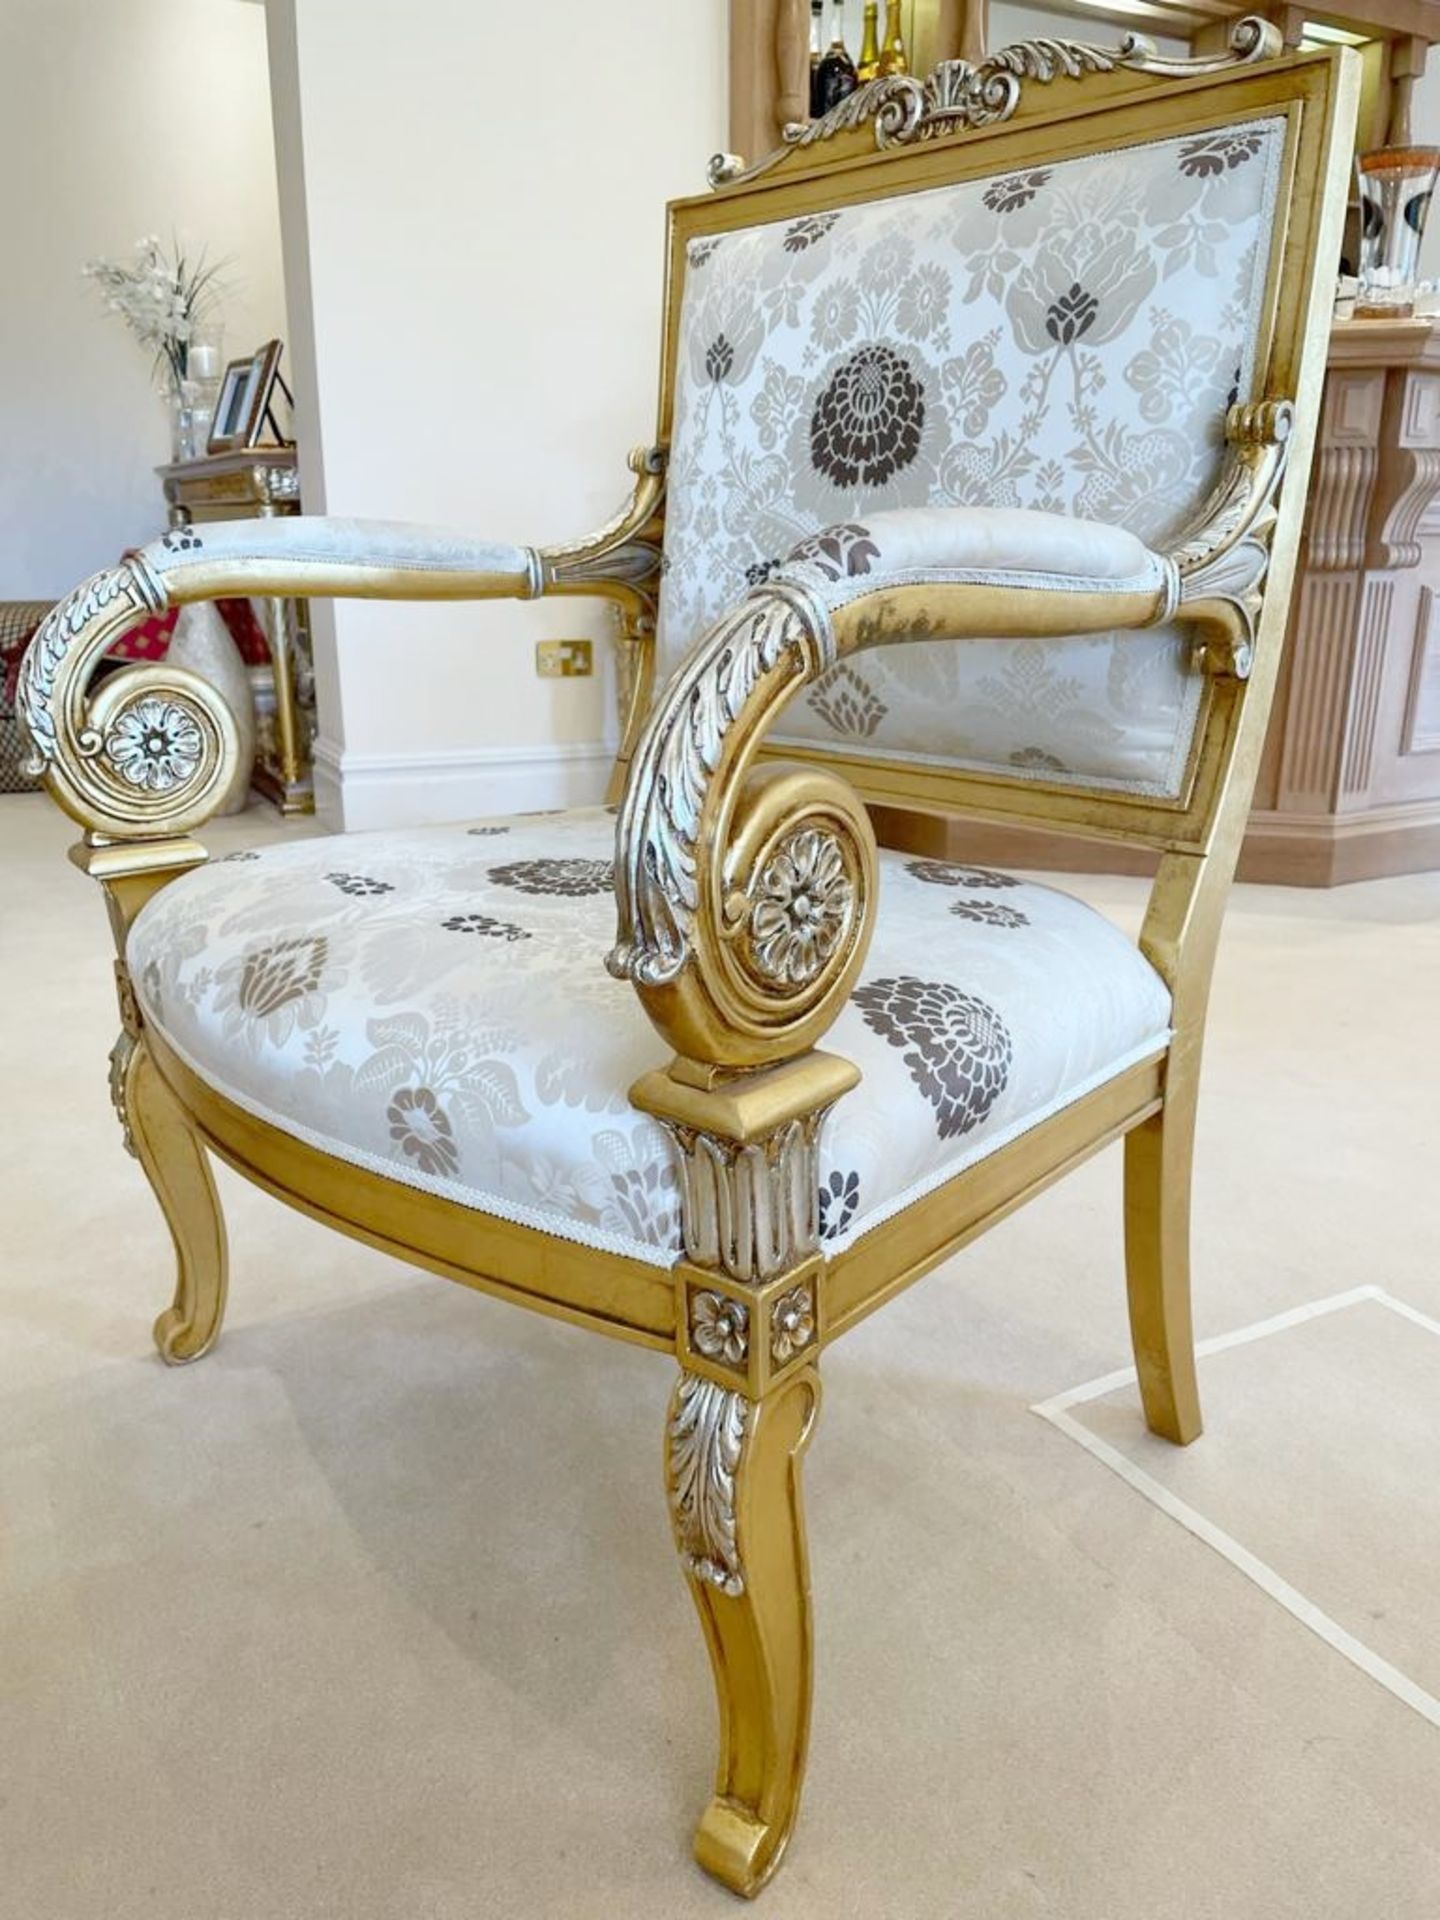 Pair of Scroll Arm Side Chair With Beautiful Carving and Bespoke Upholstery - Size: H105/46 x W75  x